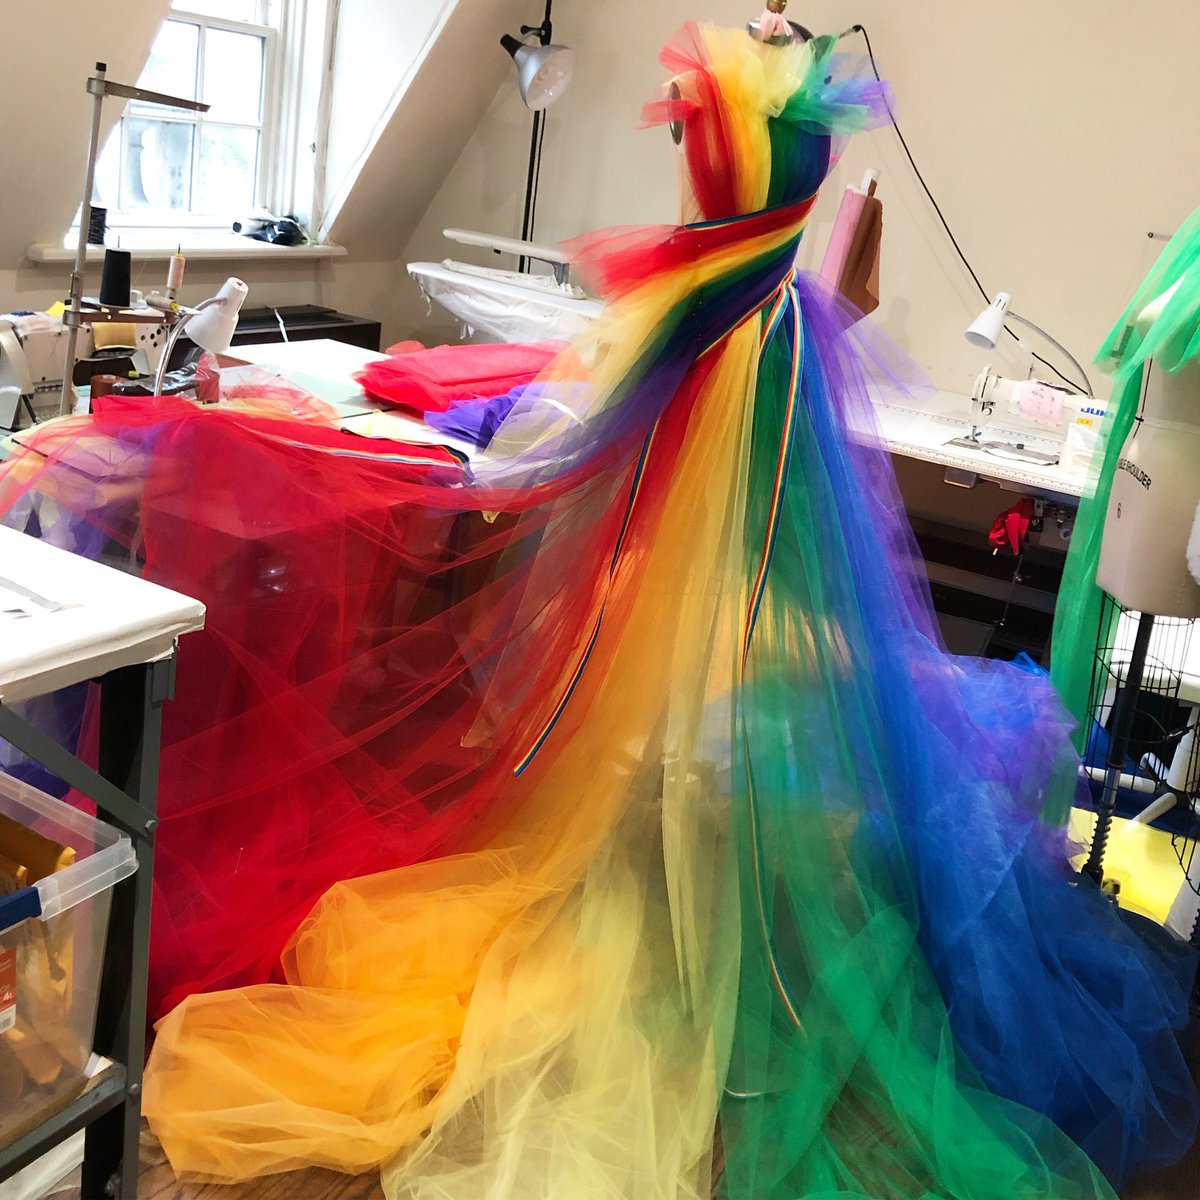 Proud to be a gay designer! #HAPPYPRIDE everyone celebrating in DC this weekend! Can’t wait for this gown to come to life. Who will wear it???? 🌈🌈🌈🌈🌈🌈🌈 #pride